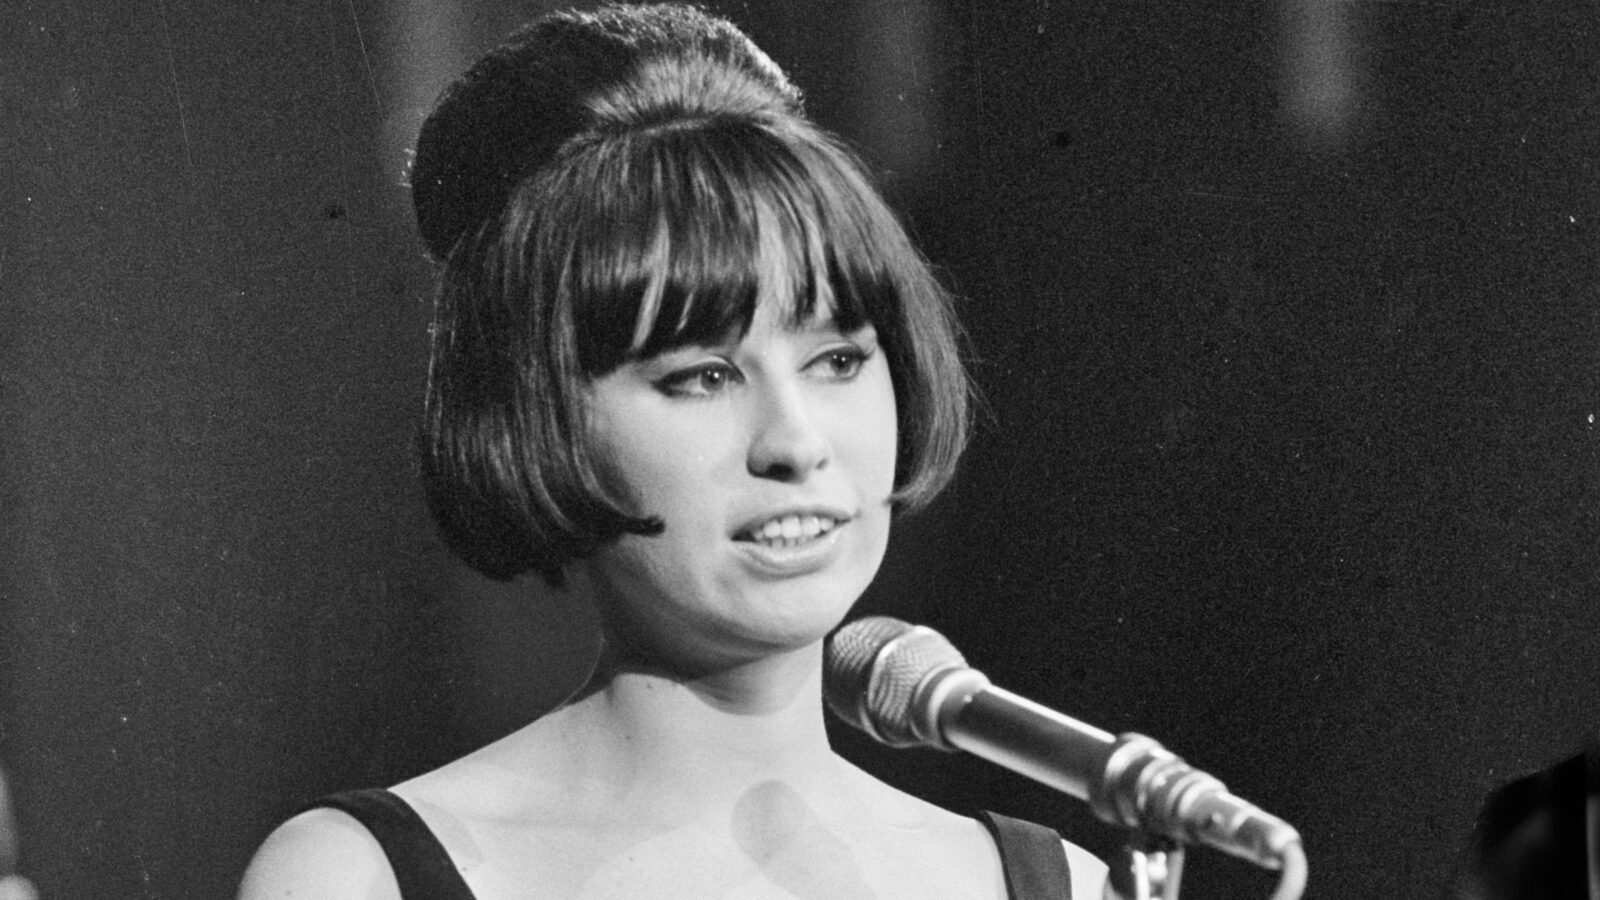 Astrud Gilberto at a microphone